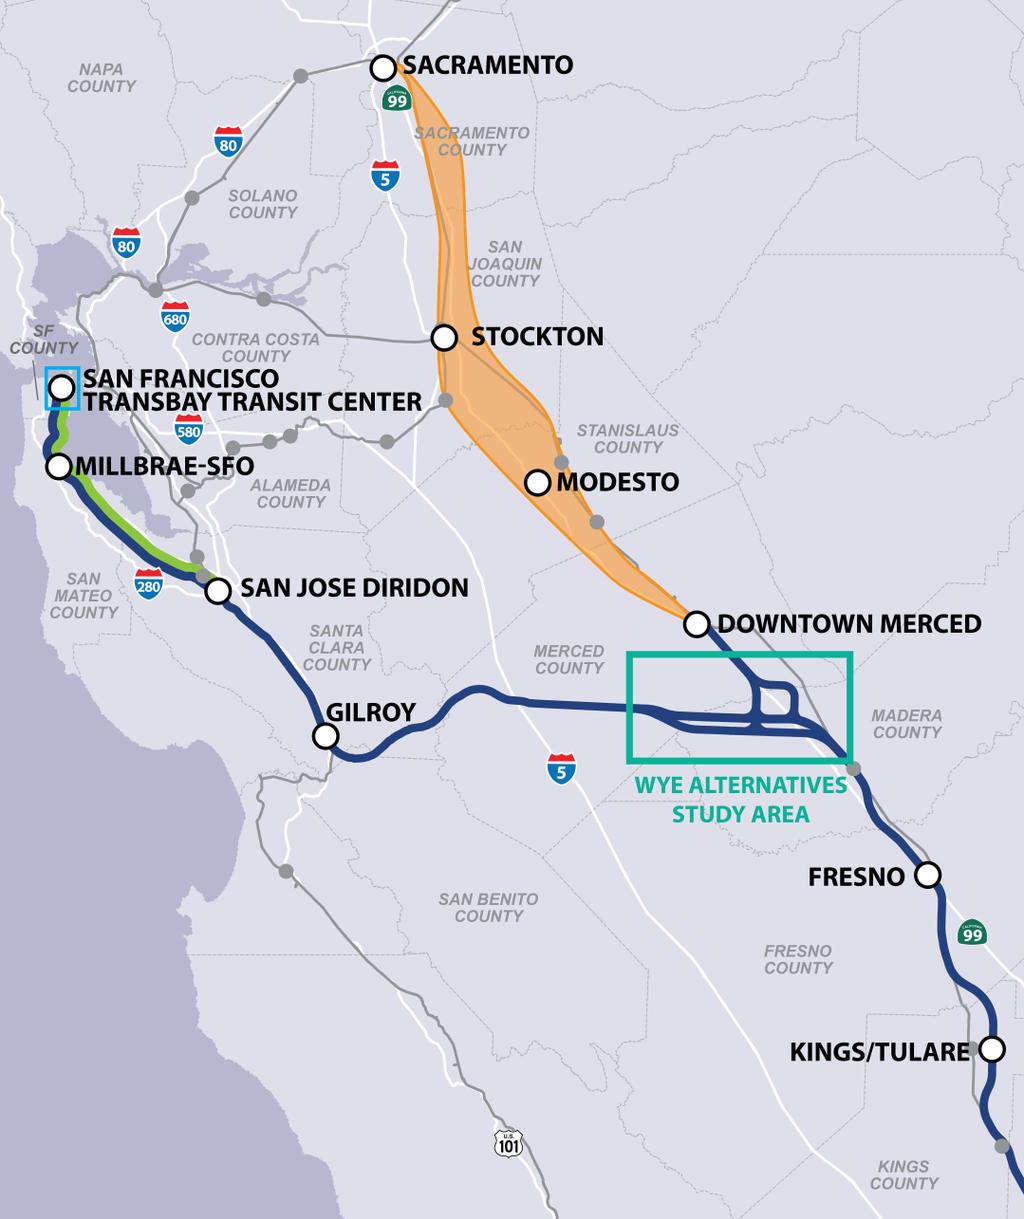 CONNECTING CALIFORNIA: Northern California Improves Mobility & Upgrades Bay Area Transportation Infrastructure Connects Bay Area to Central Valley